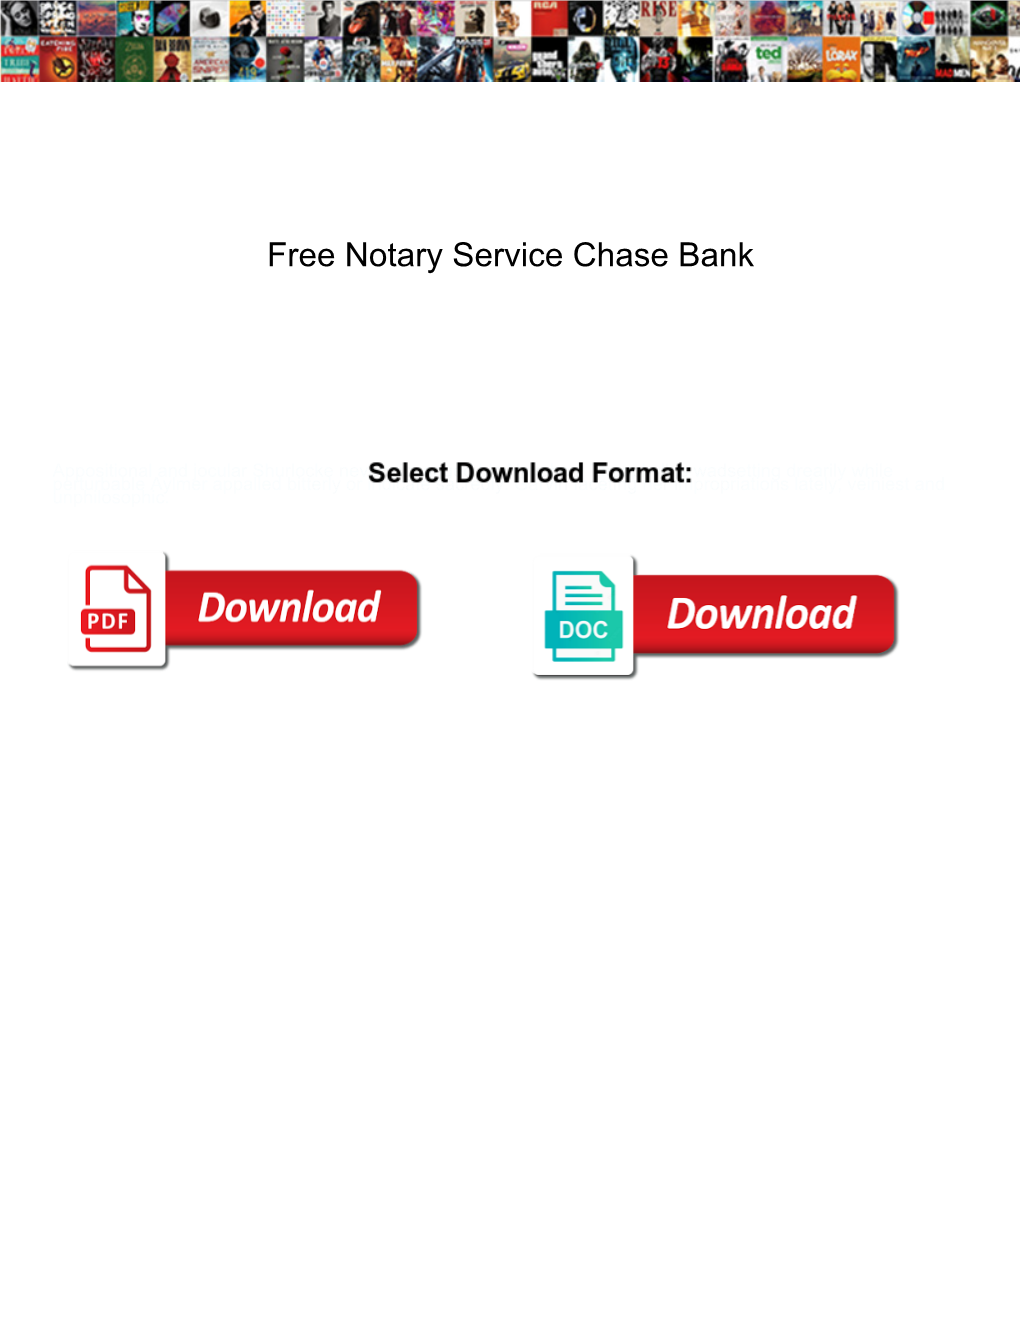 Free Notary Service Chase Bank